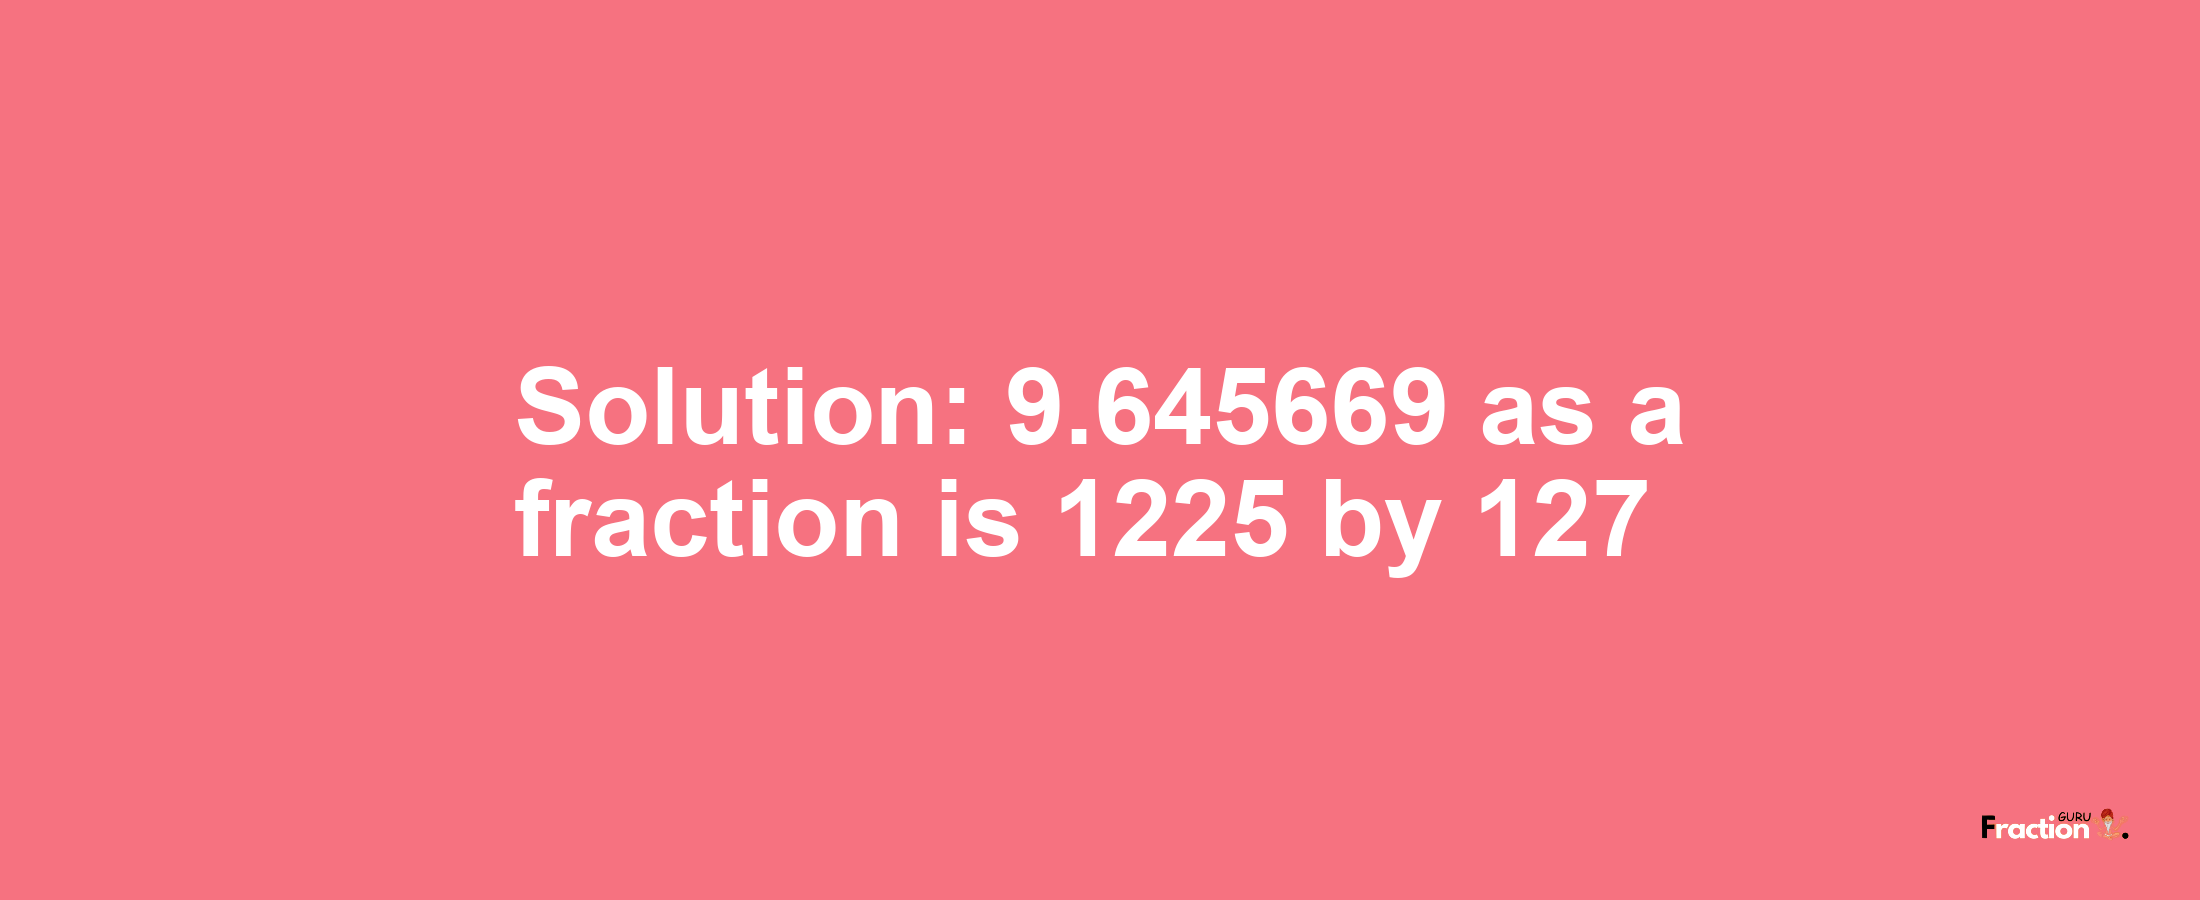 Solution:9.645669 as a fraction is 1225/127